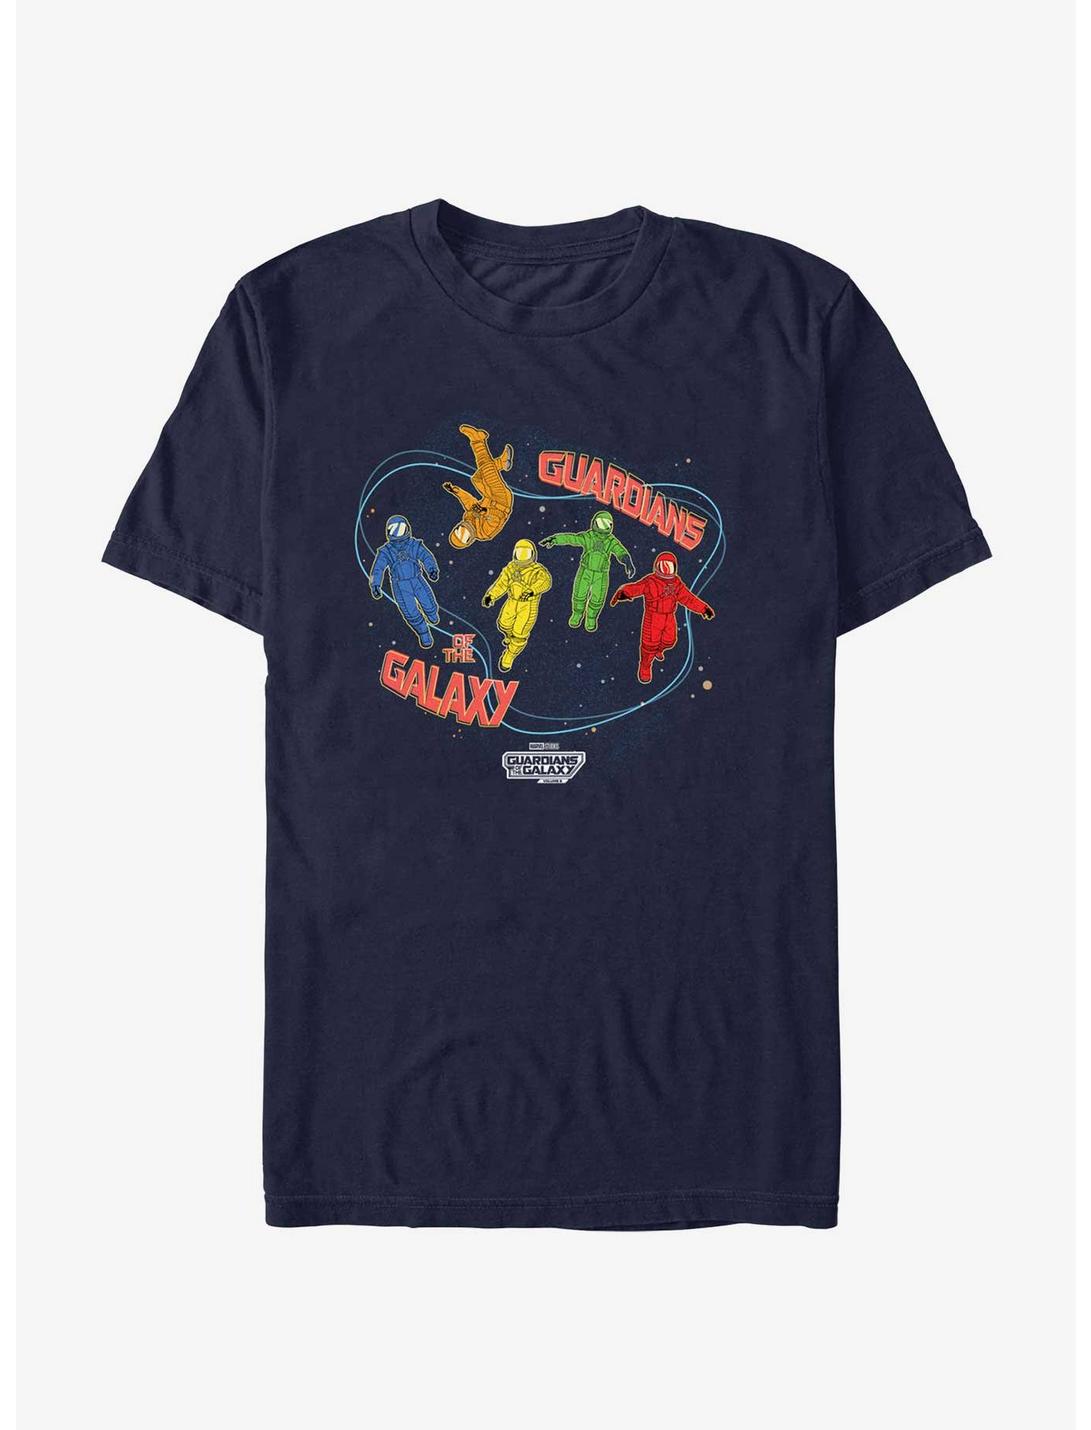 Guardians Of The Galaxy Vol. 3 Astronauts In Space T-Shirt, NAVY, hi-res